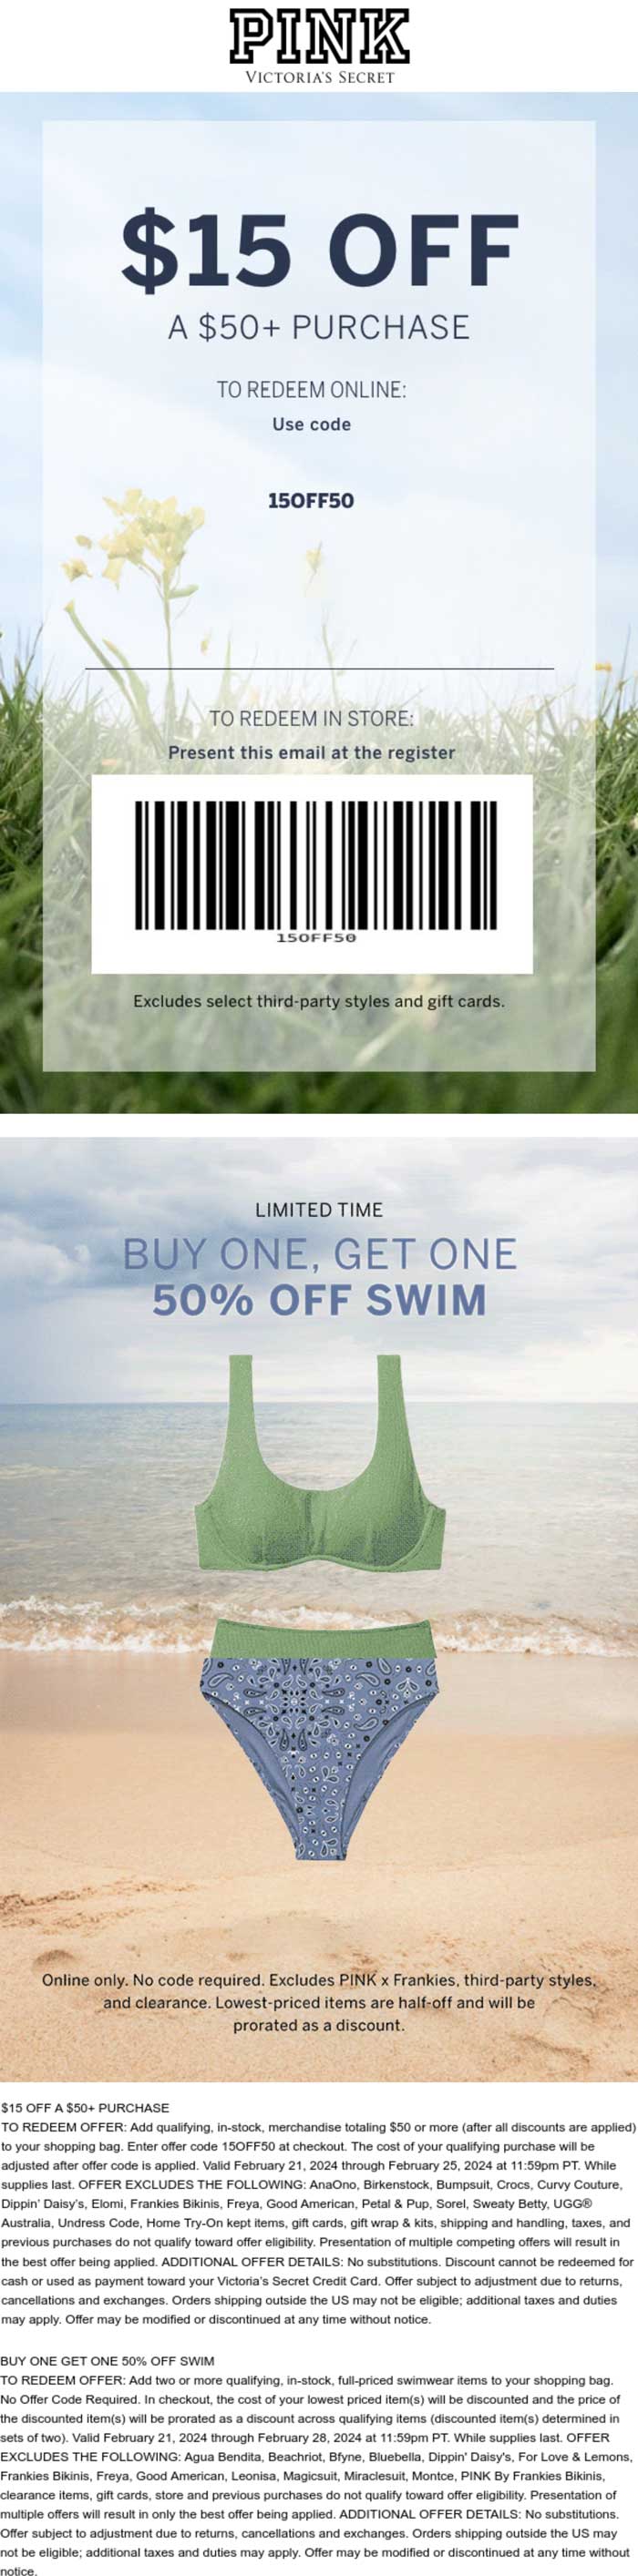 PINK stores Coupon  $15 off $50 & second swim 50% off at PINK, or online via promo code 15OFF50 #pink 